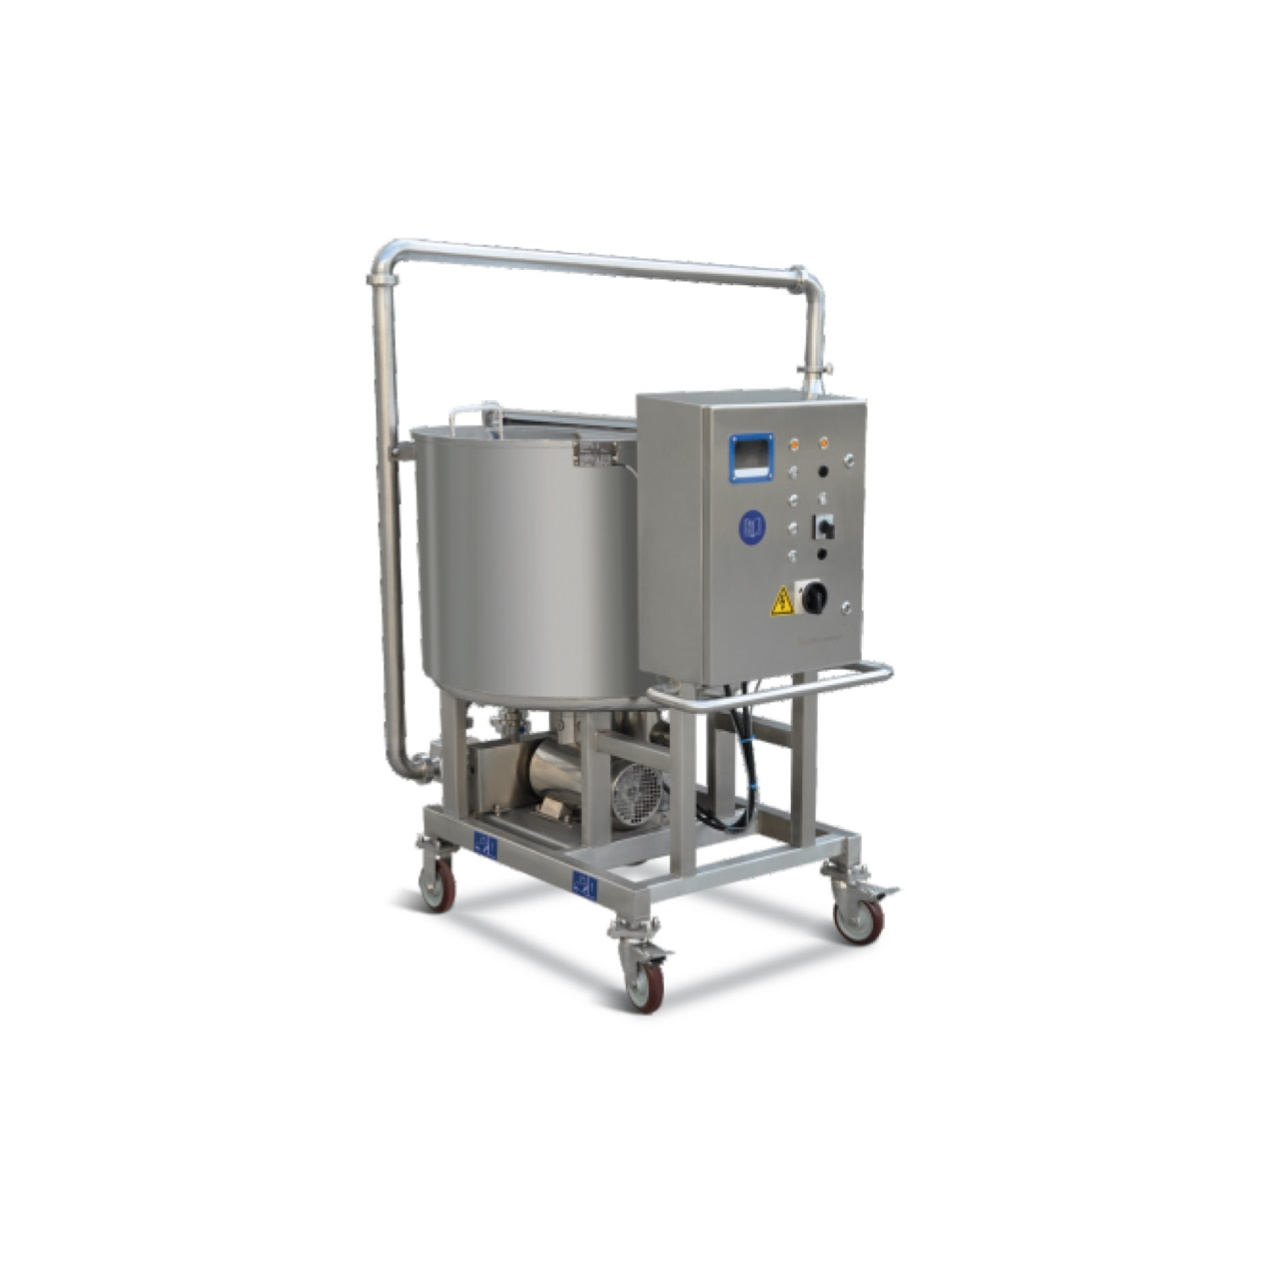 Hiwell's Batter Mixer Helps Improve Food Processing Efficiency